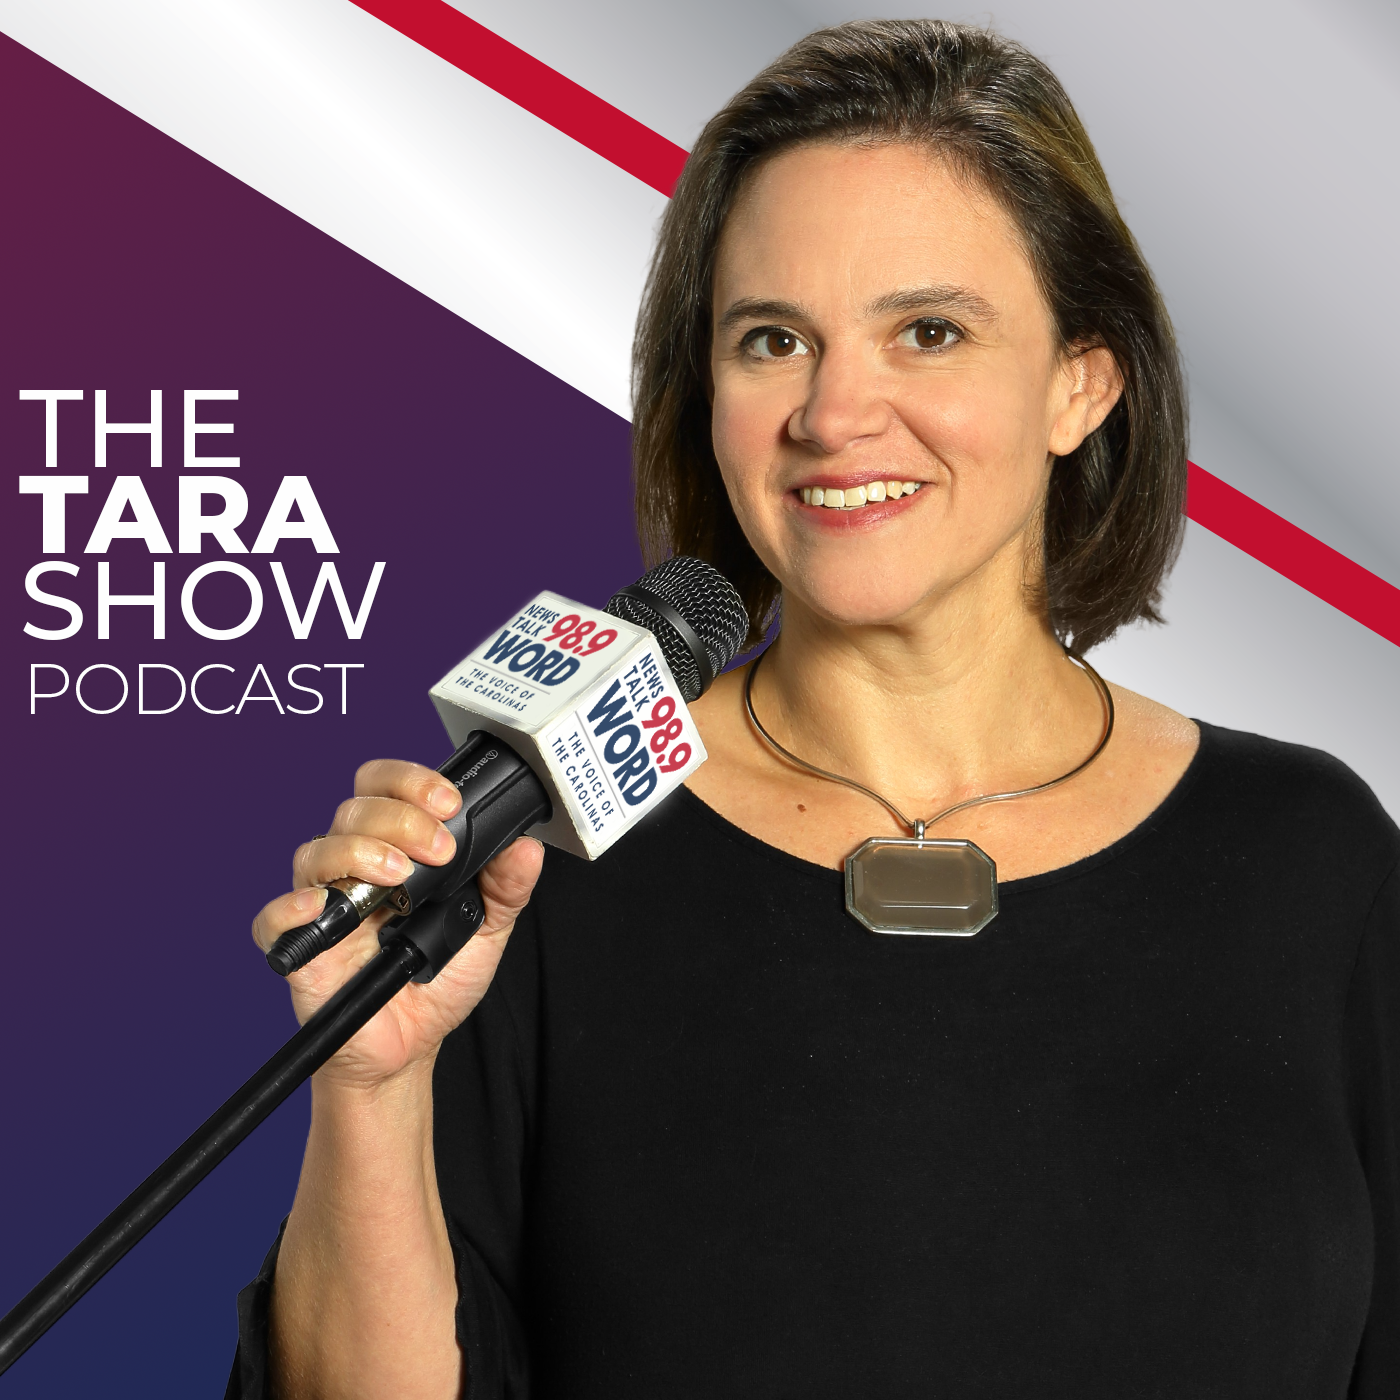 Hour 1: The Tara Show - “Welcome to America” “The Biden Crime Family” “The Looming Economic Disaster” “How Stagflation Affects the Election”